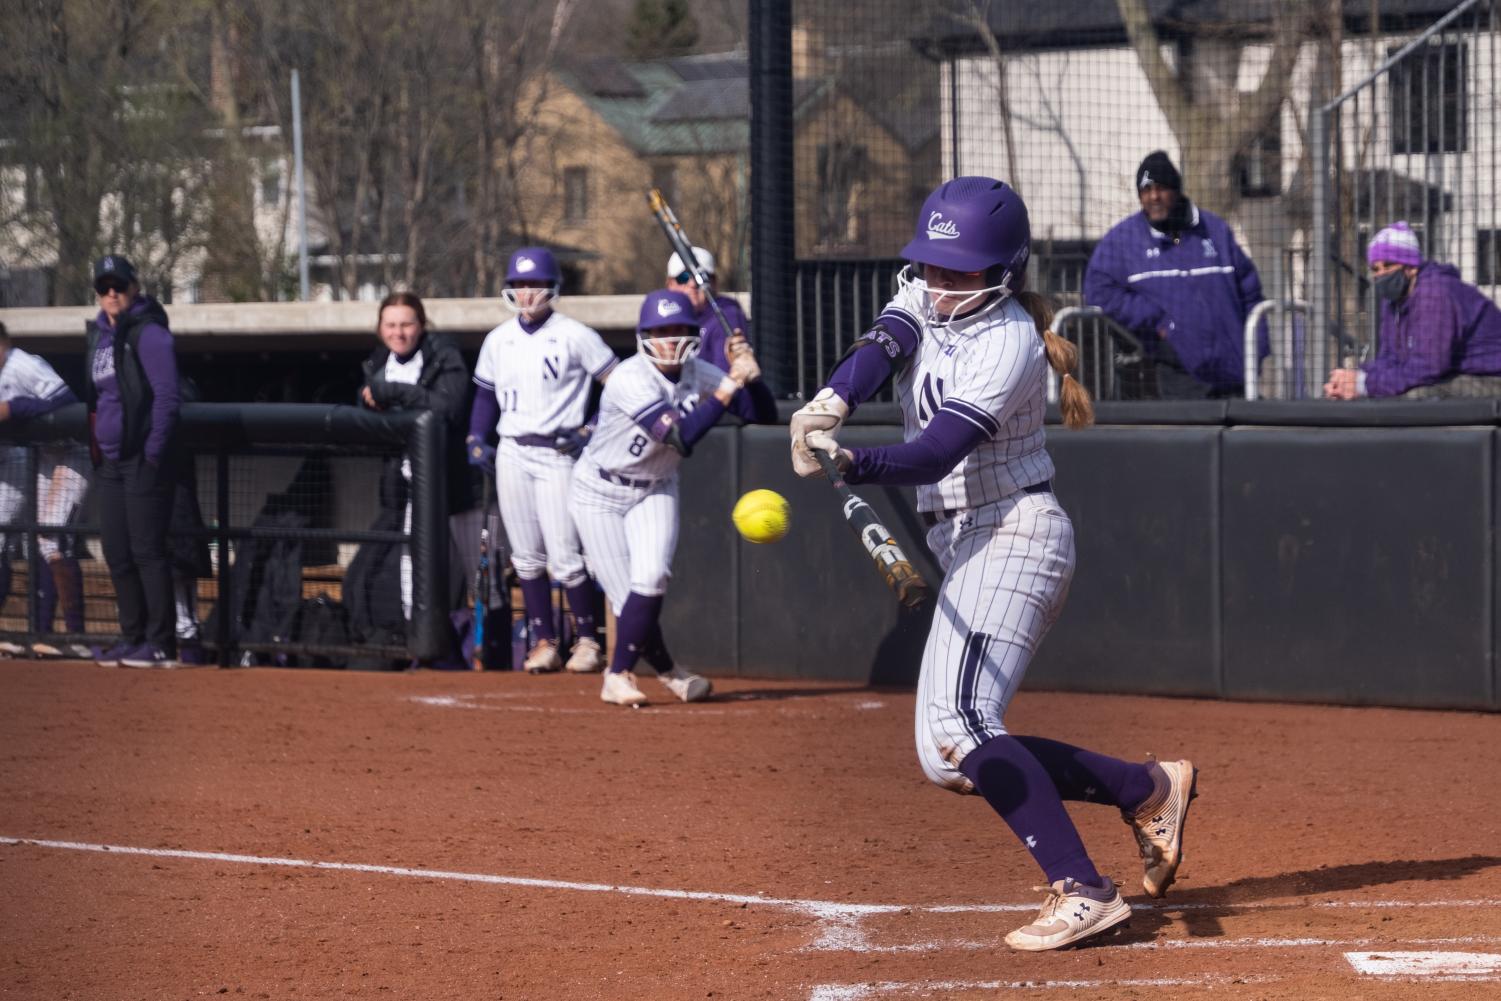 Softball+player+in+purple+and+white+uniform+takes+a+swing.